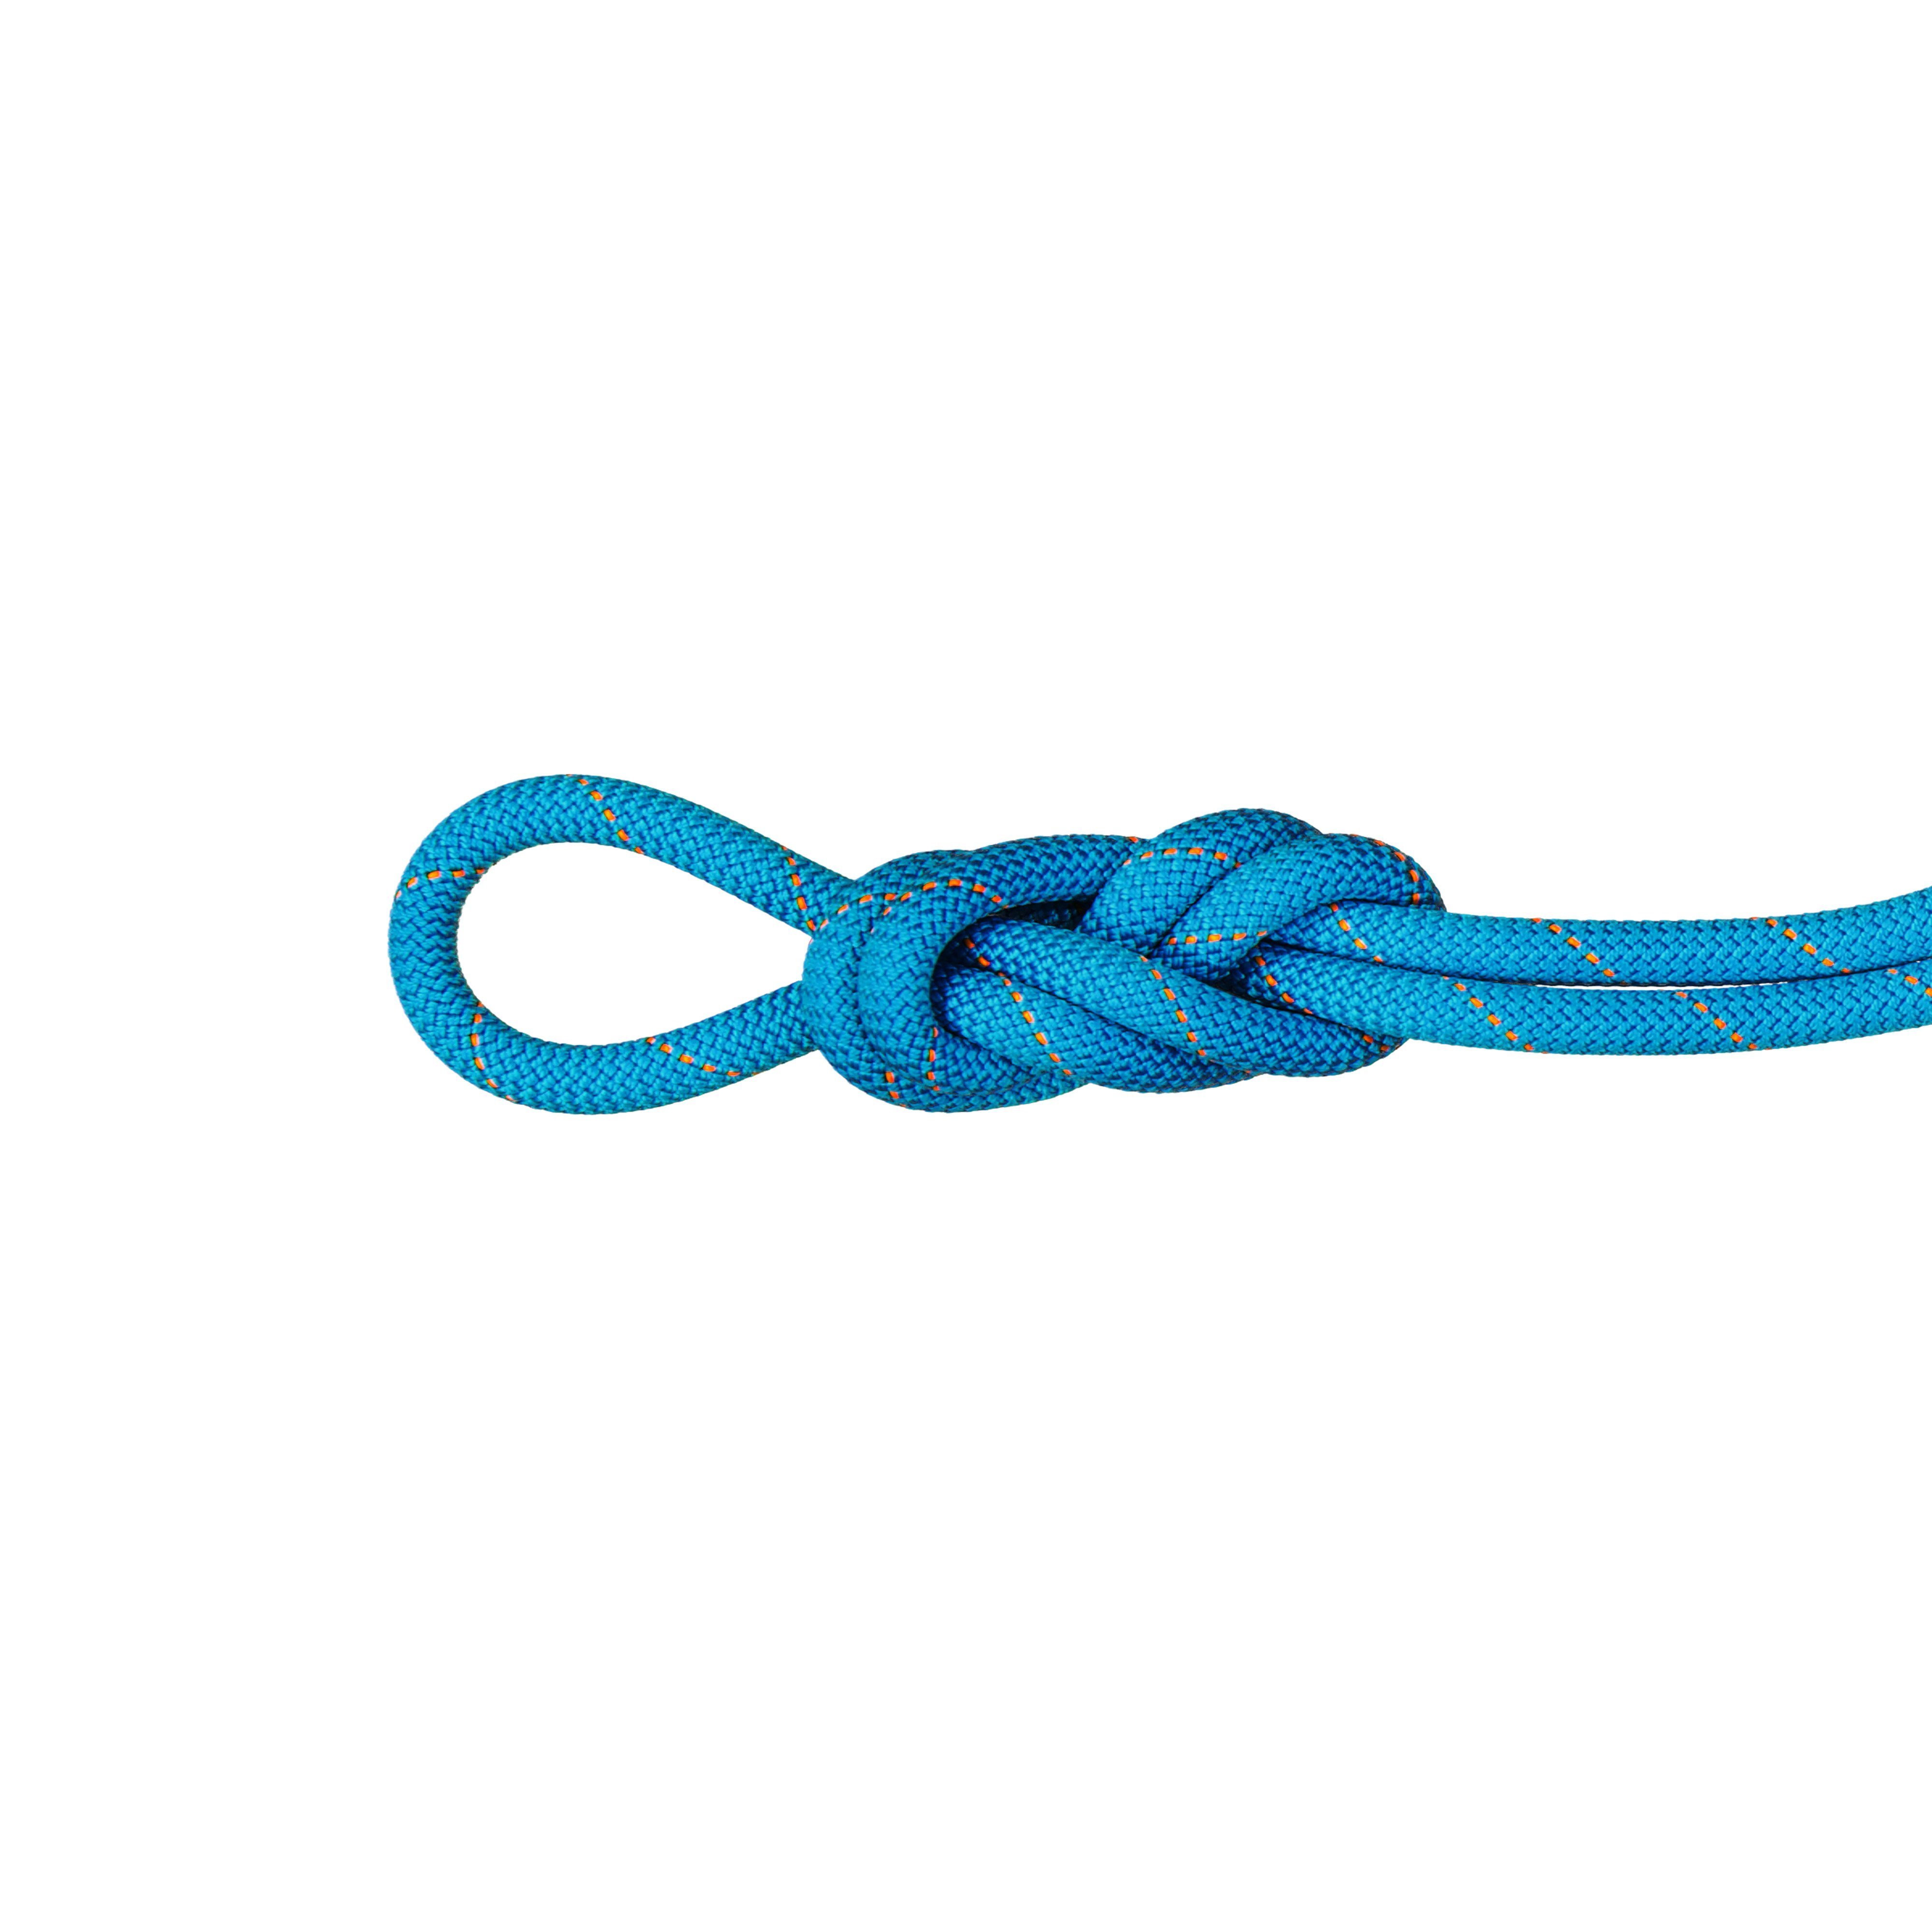 9.9 Gym Workhorse Dry Rope thumbnail